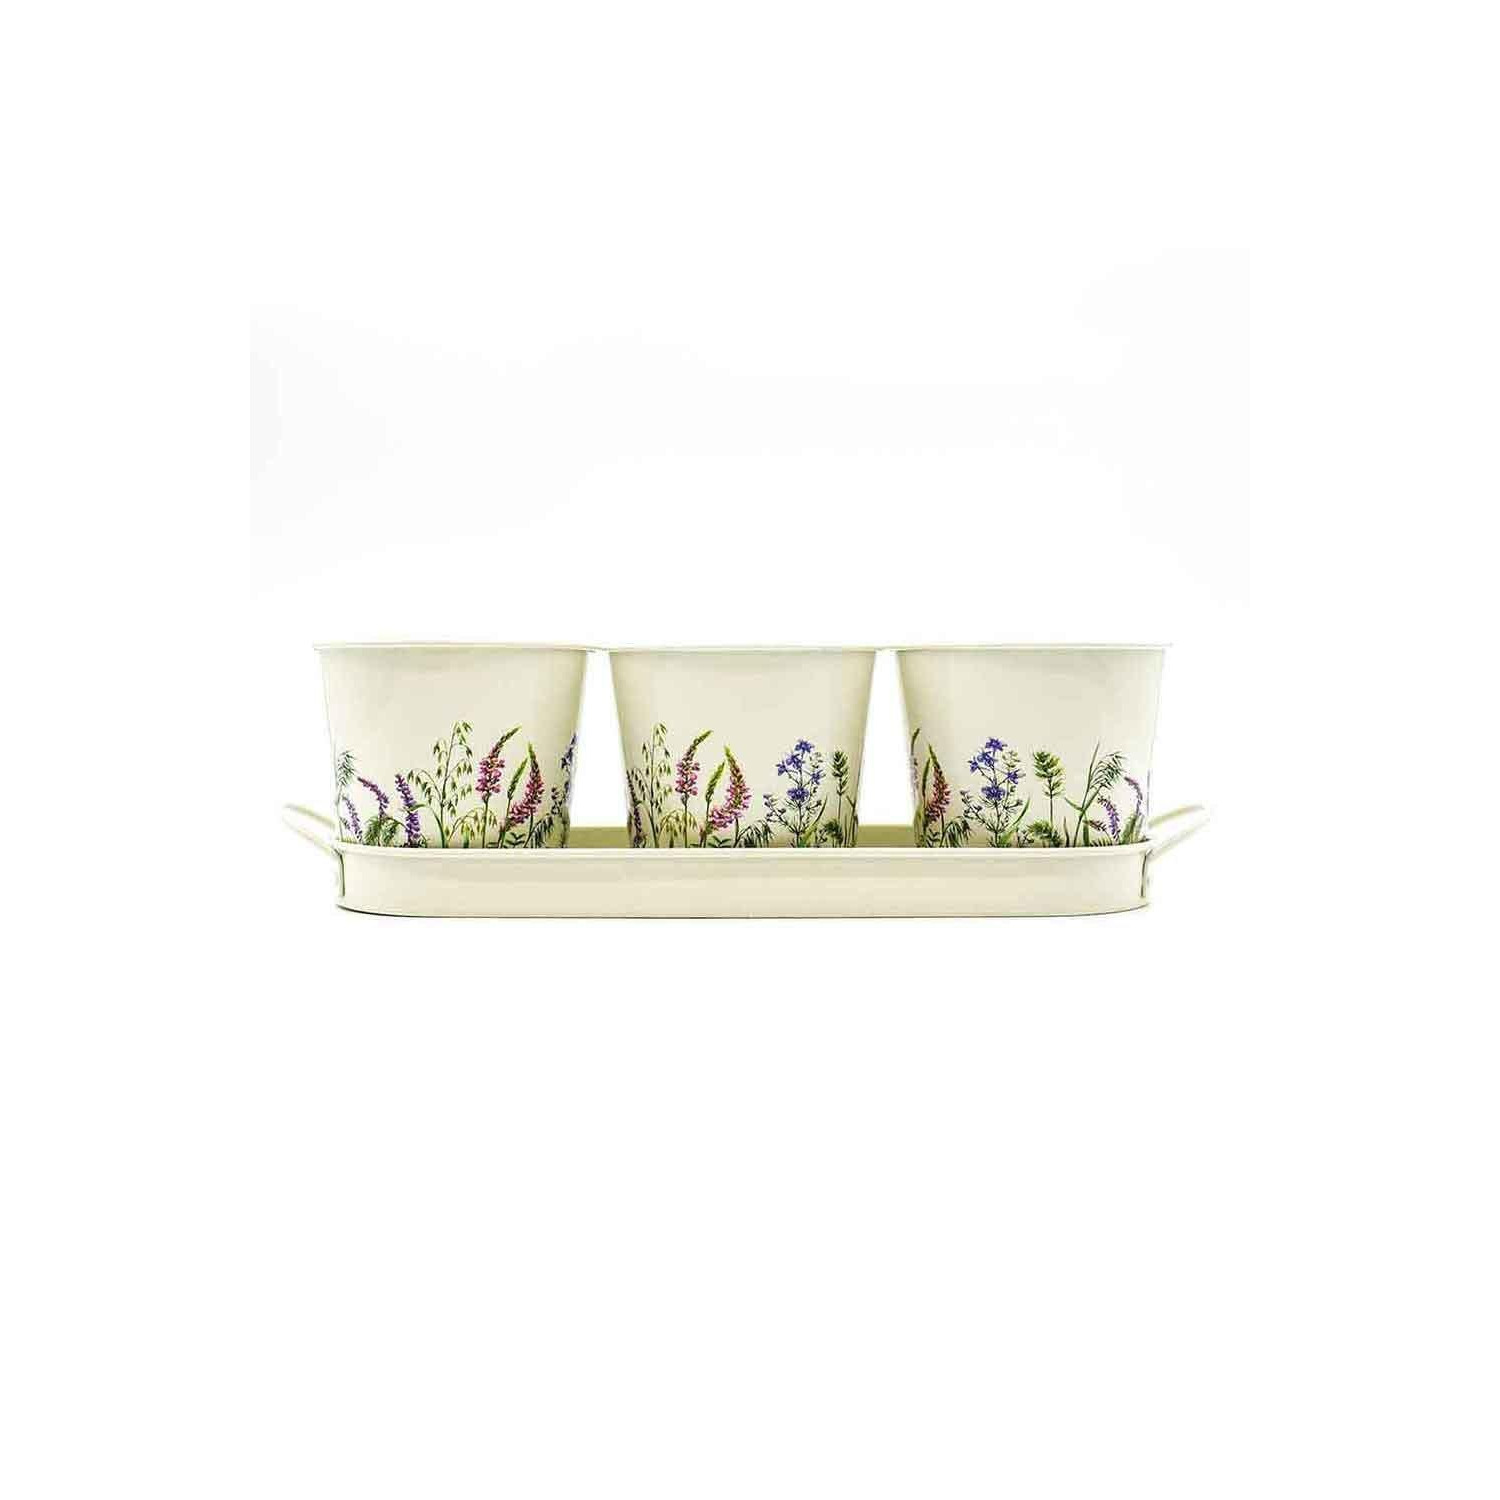 Set of 3 Country Foral Design Metal Planters with Tray - image 1